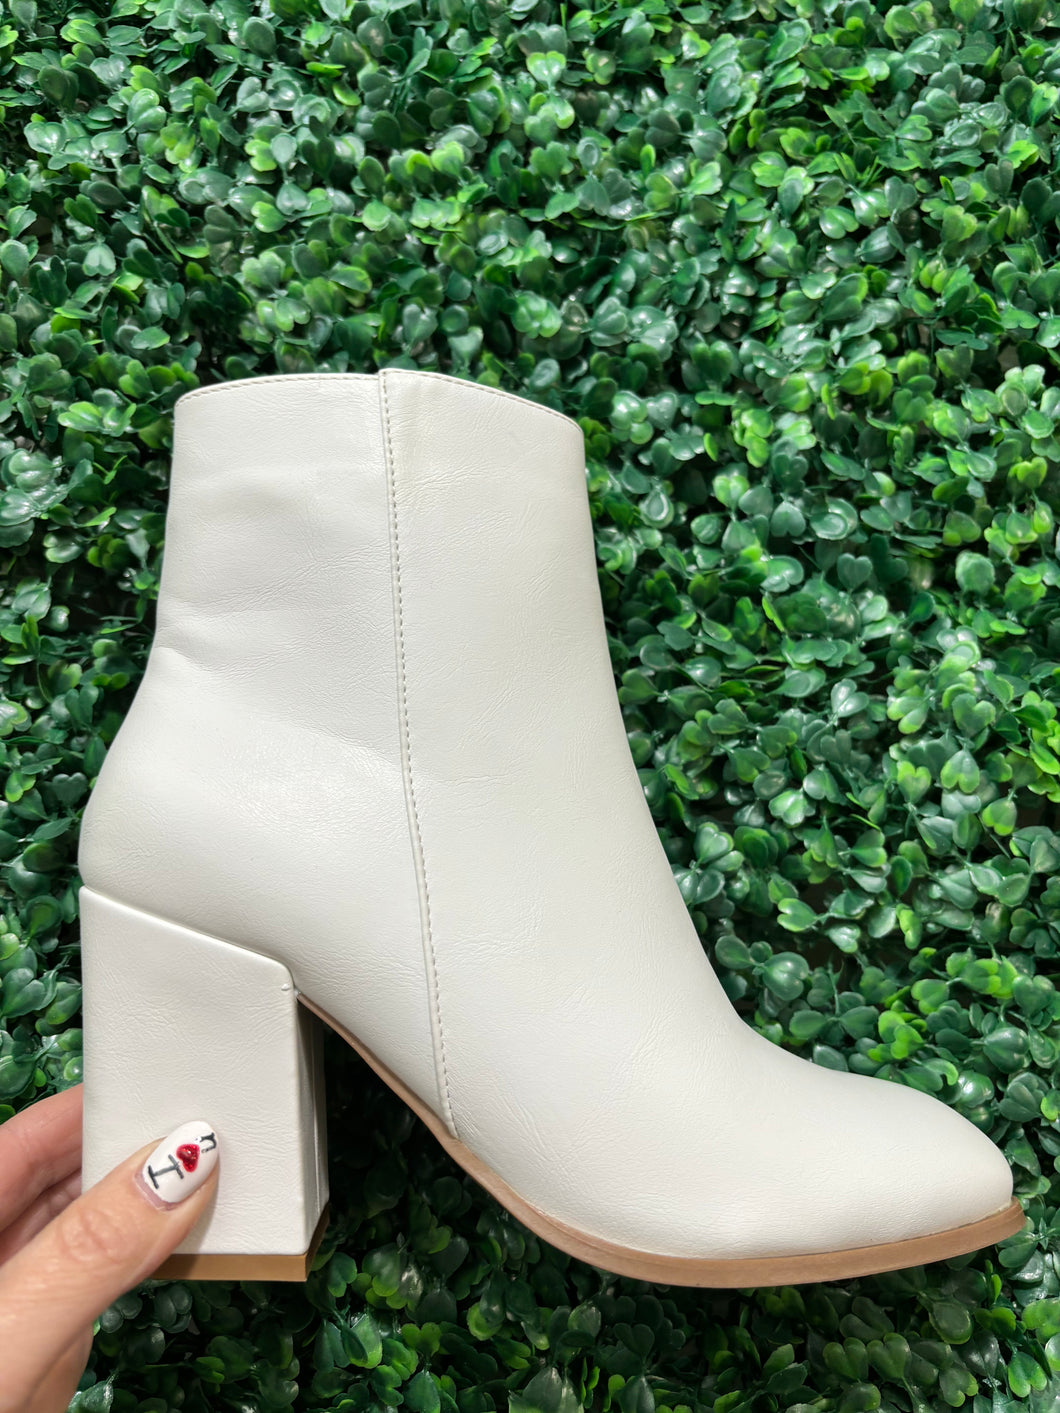 Only In Time Ankle Boots *FINAL SALE*